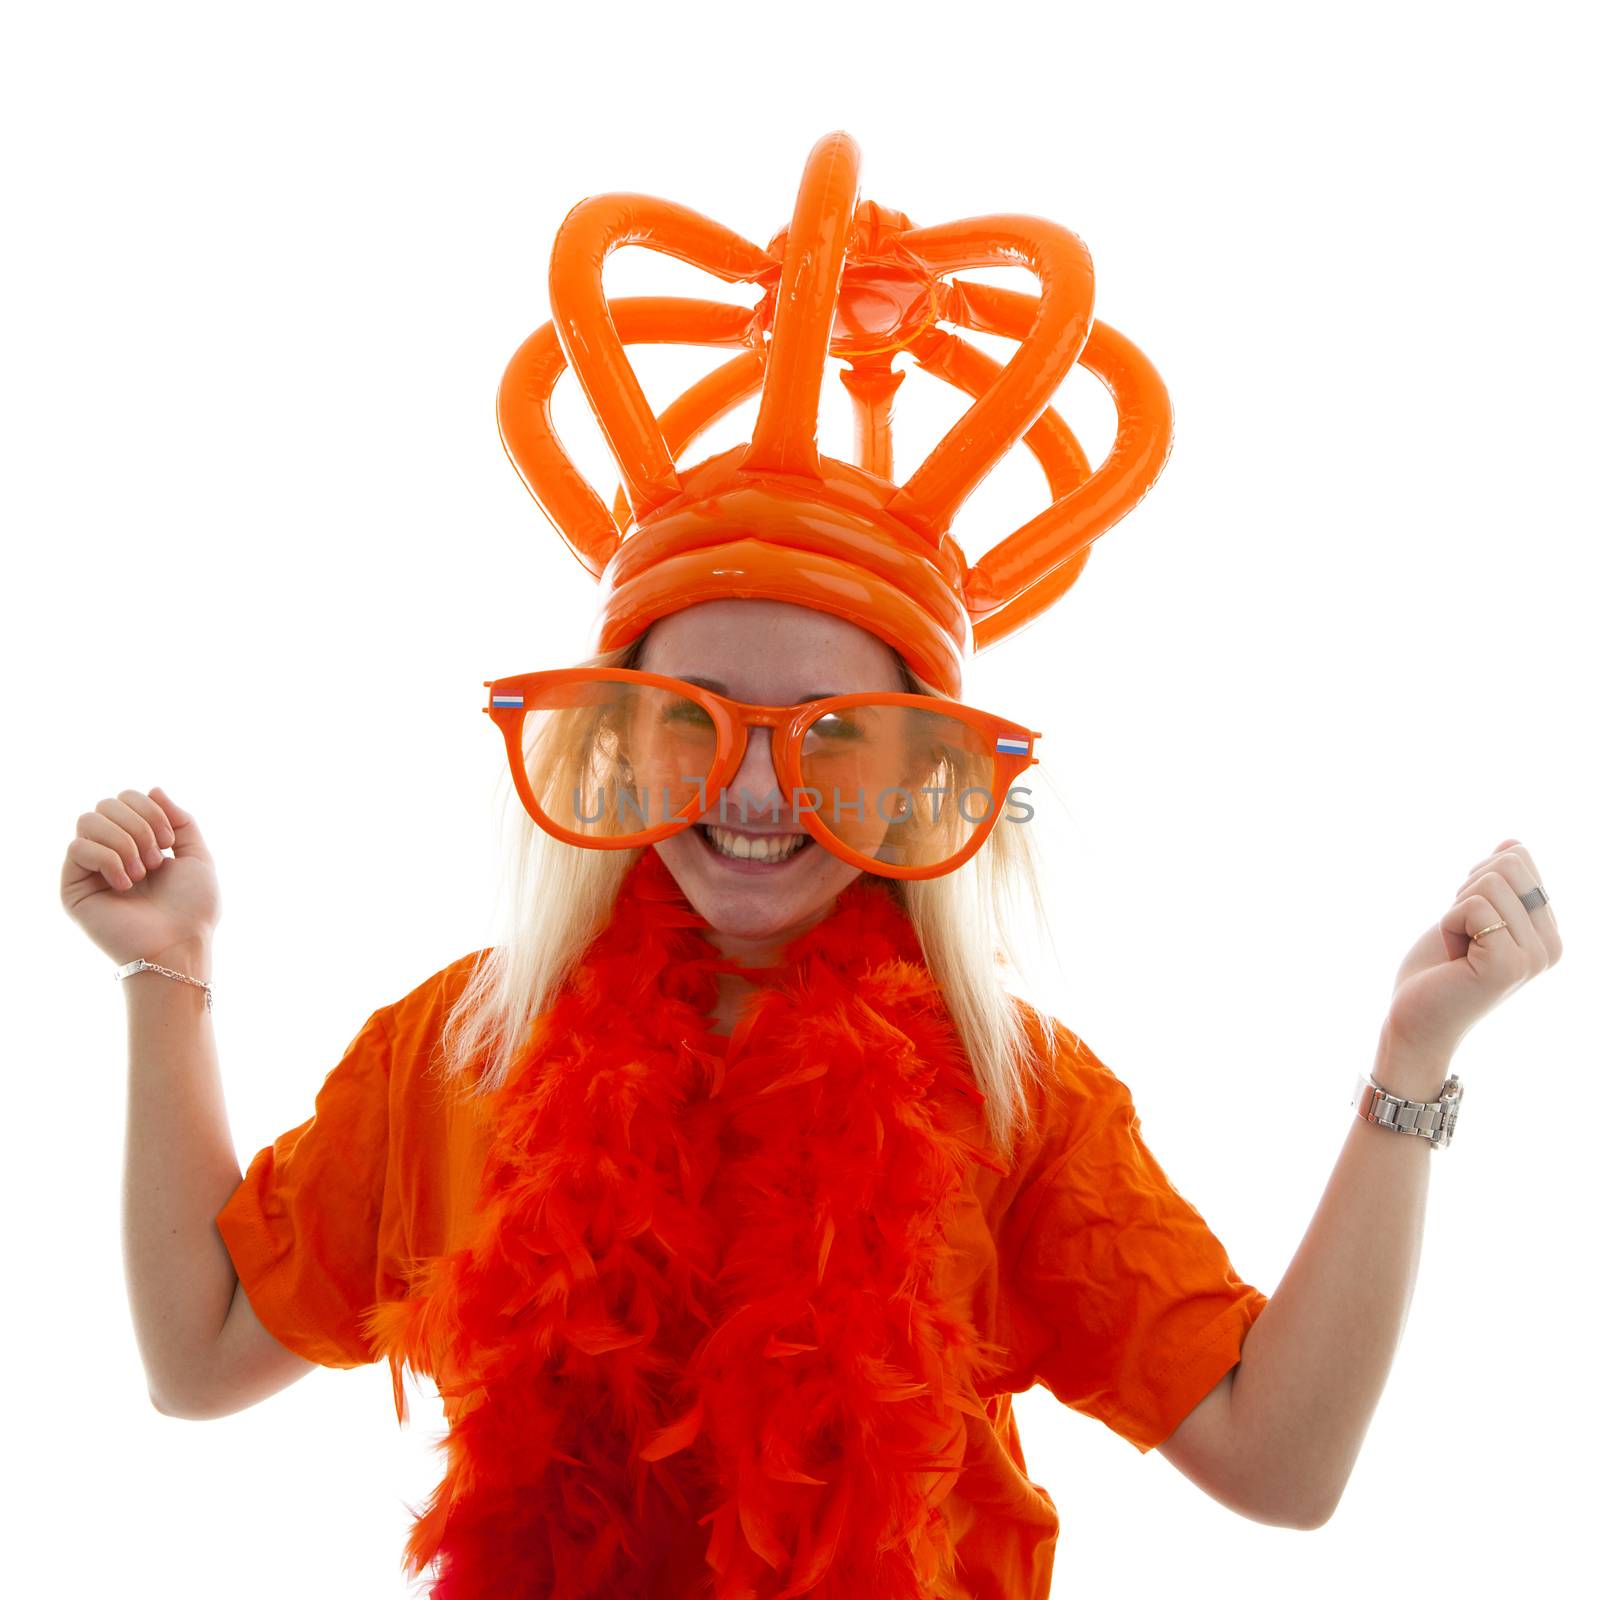 Young woman as Dutch orange supporter with crown over white background